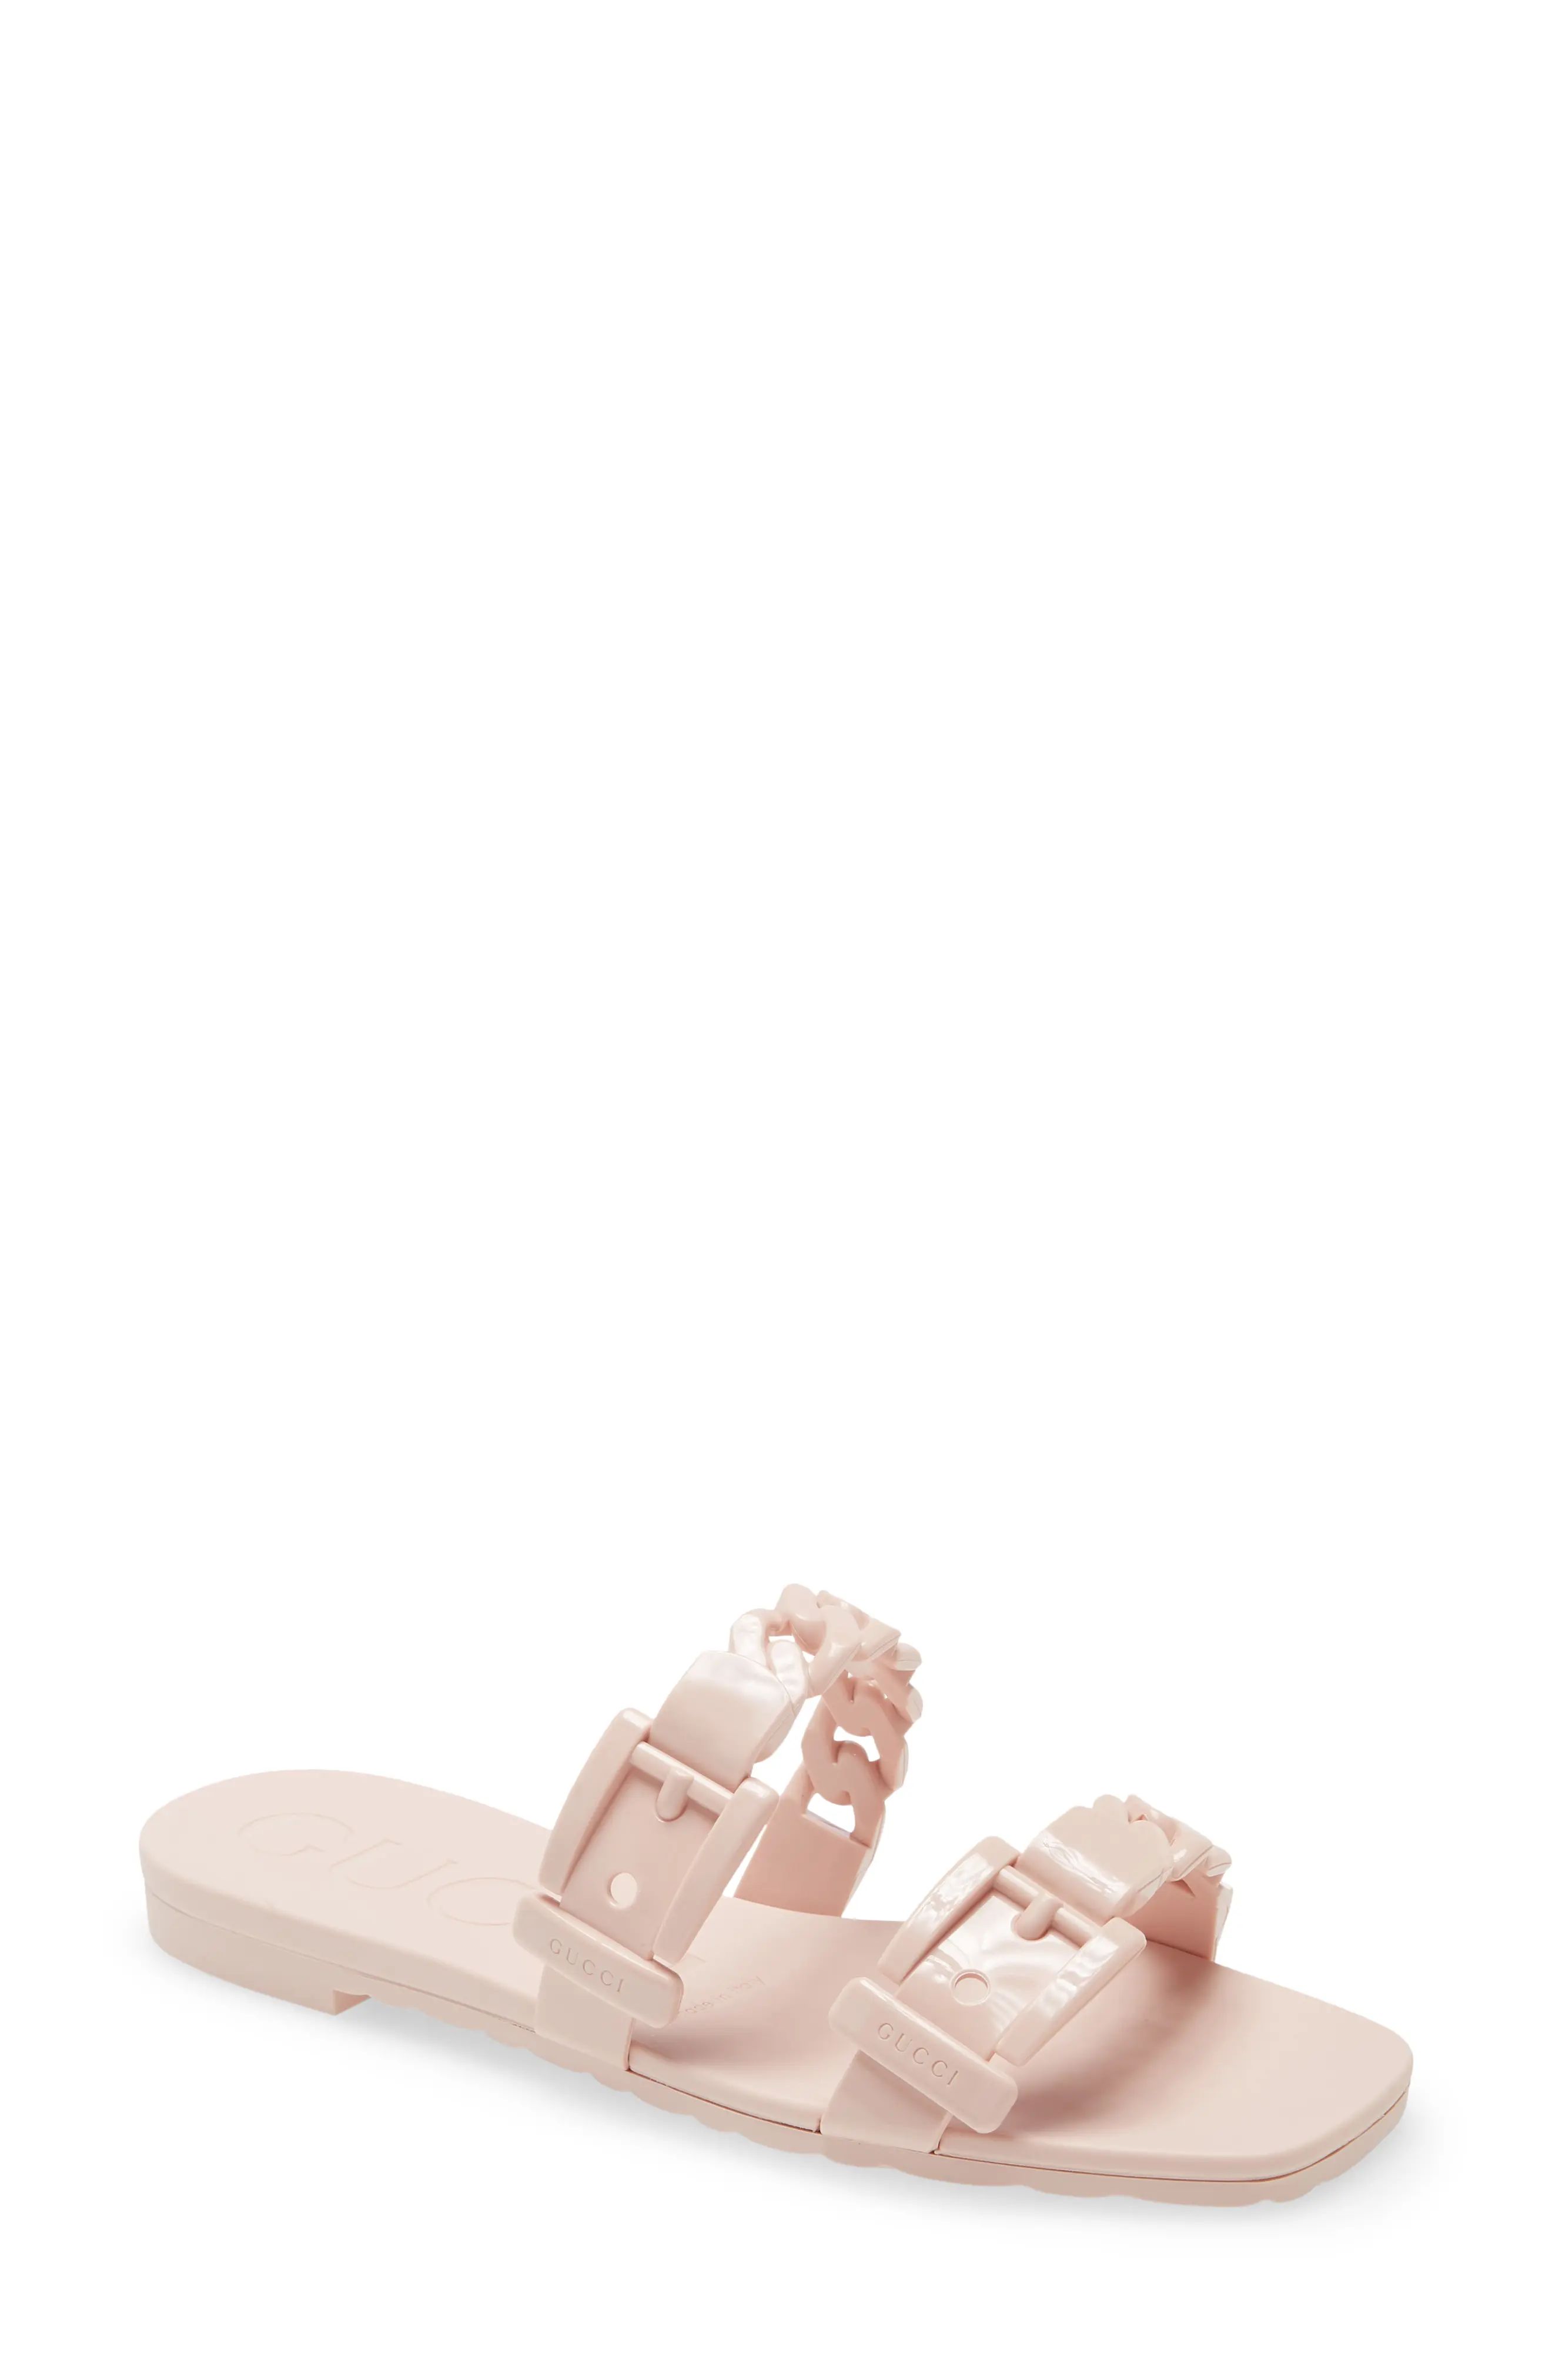 GUCCI Teena Slide Sandal in Perfect Pink at Nordstrom, Size 5Us | Nordstrom